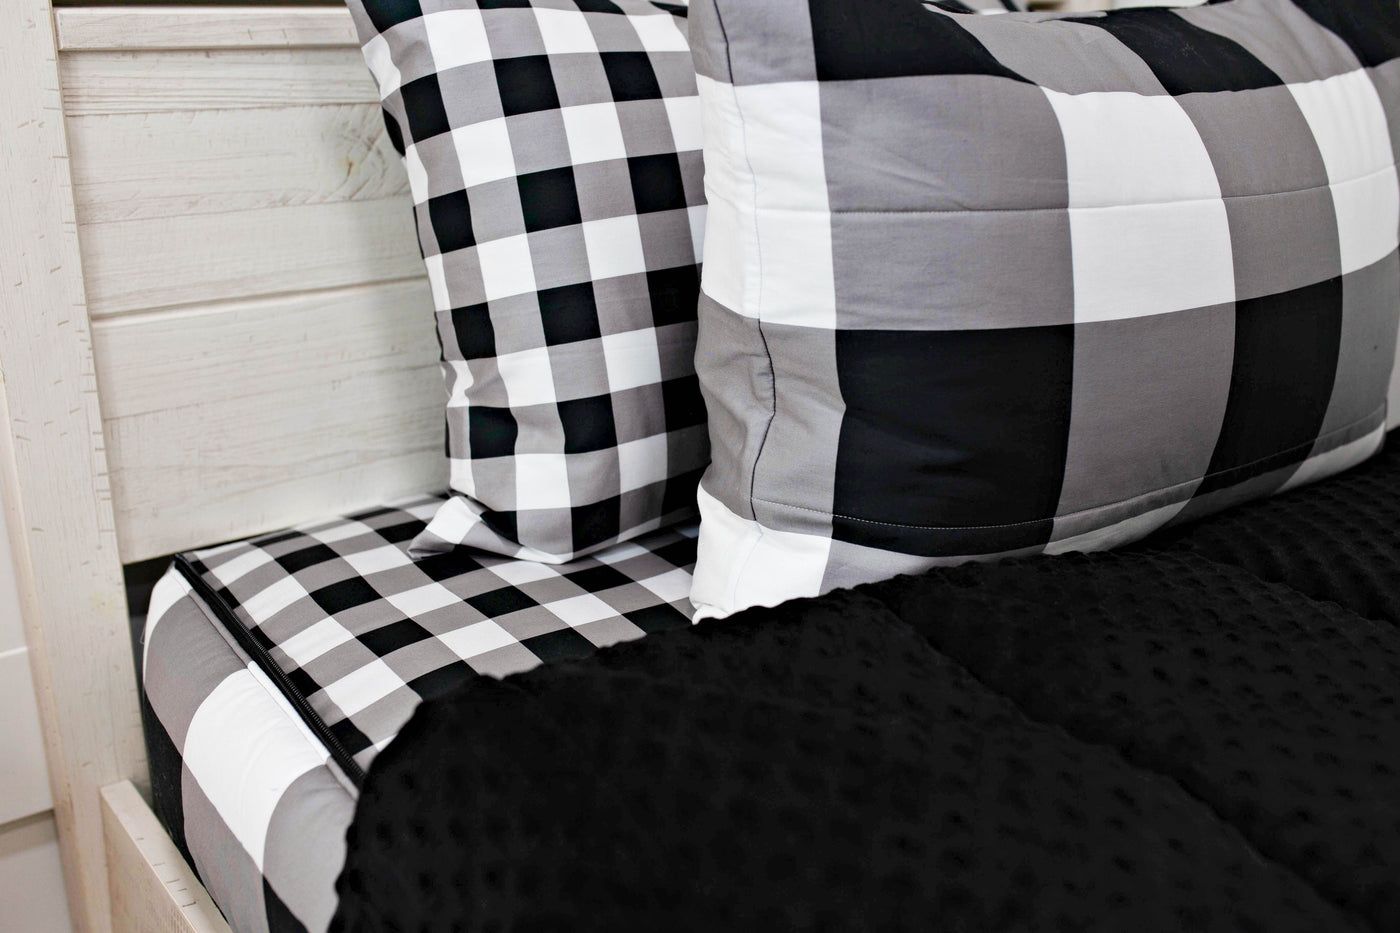 Black and white pillow case and sham on black and white checker zipper bedding with black minky inner lining 